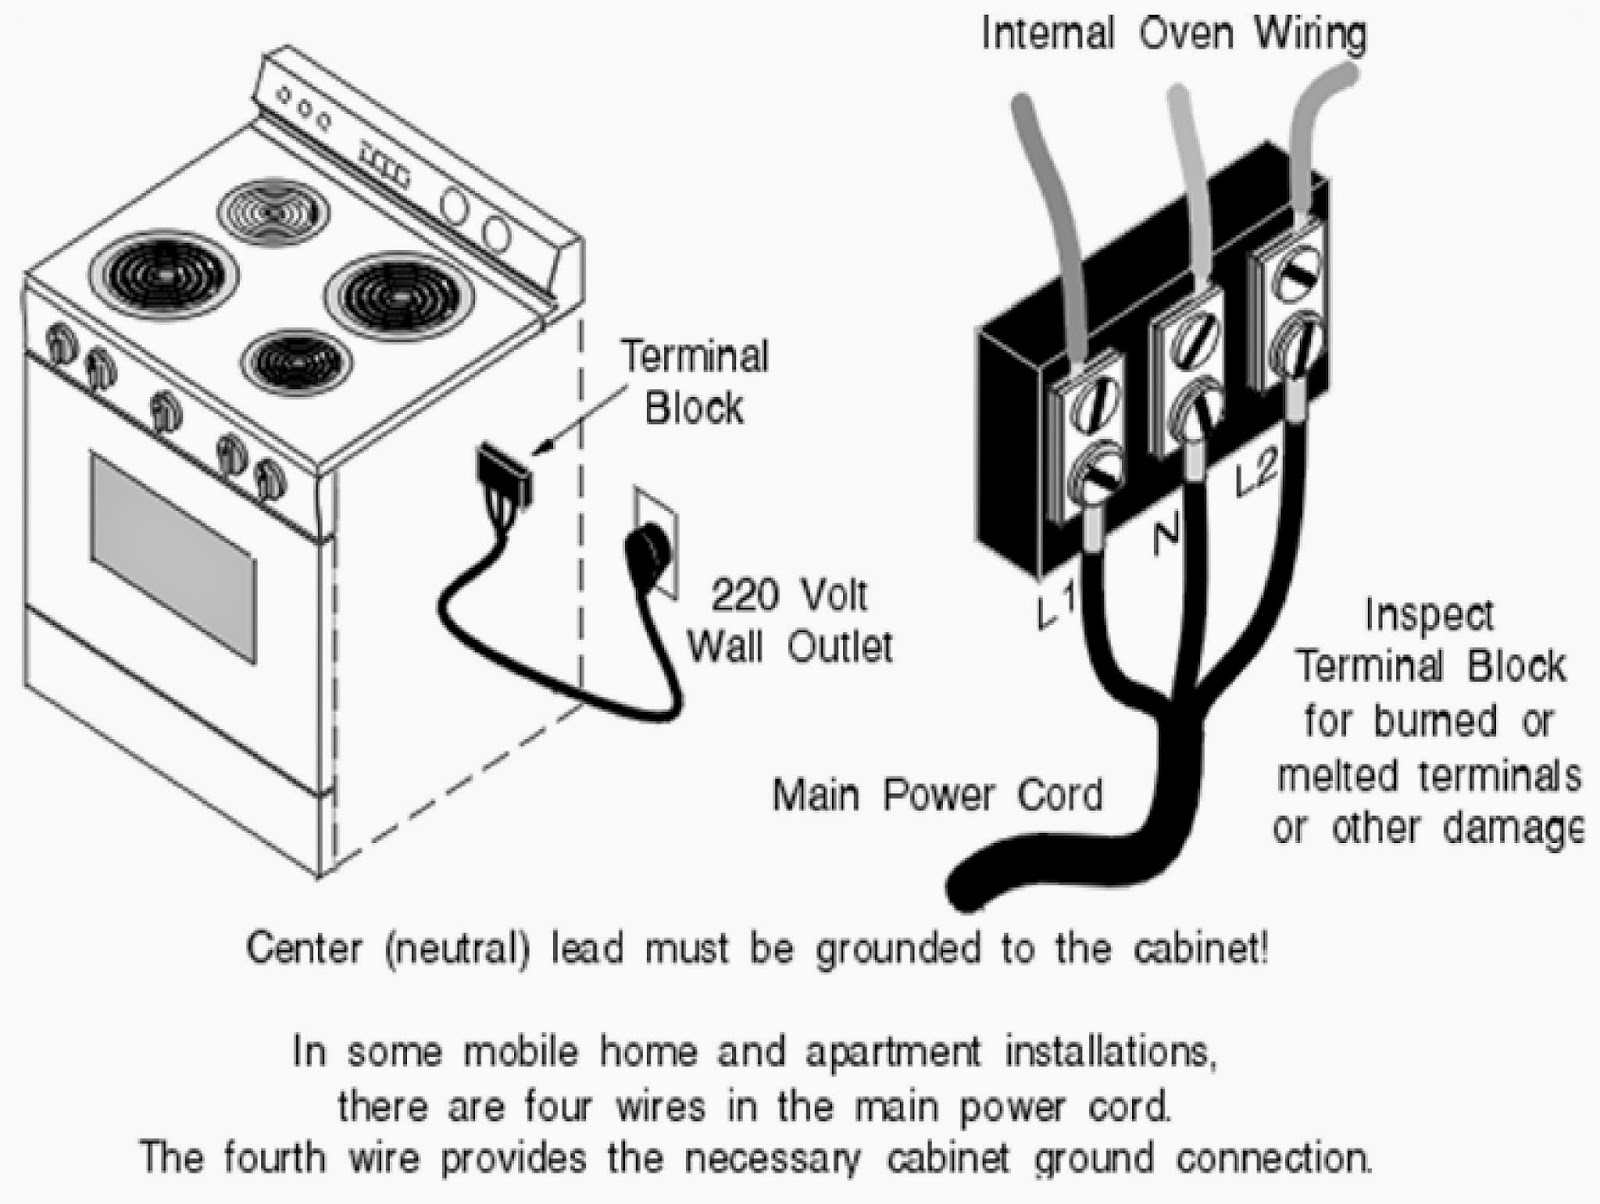 Gallery of Wiring Diagram For An Electric Stove.